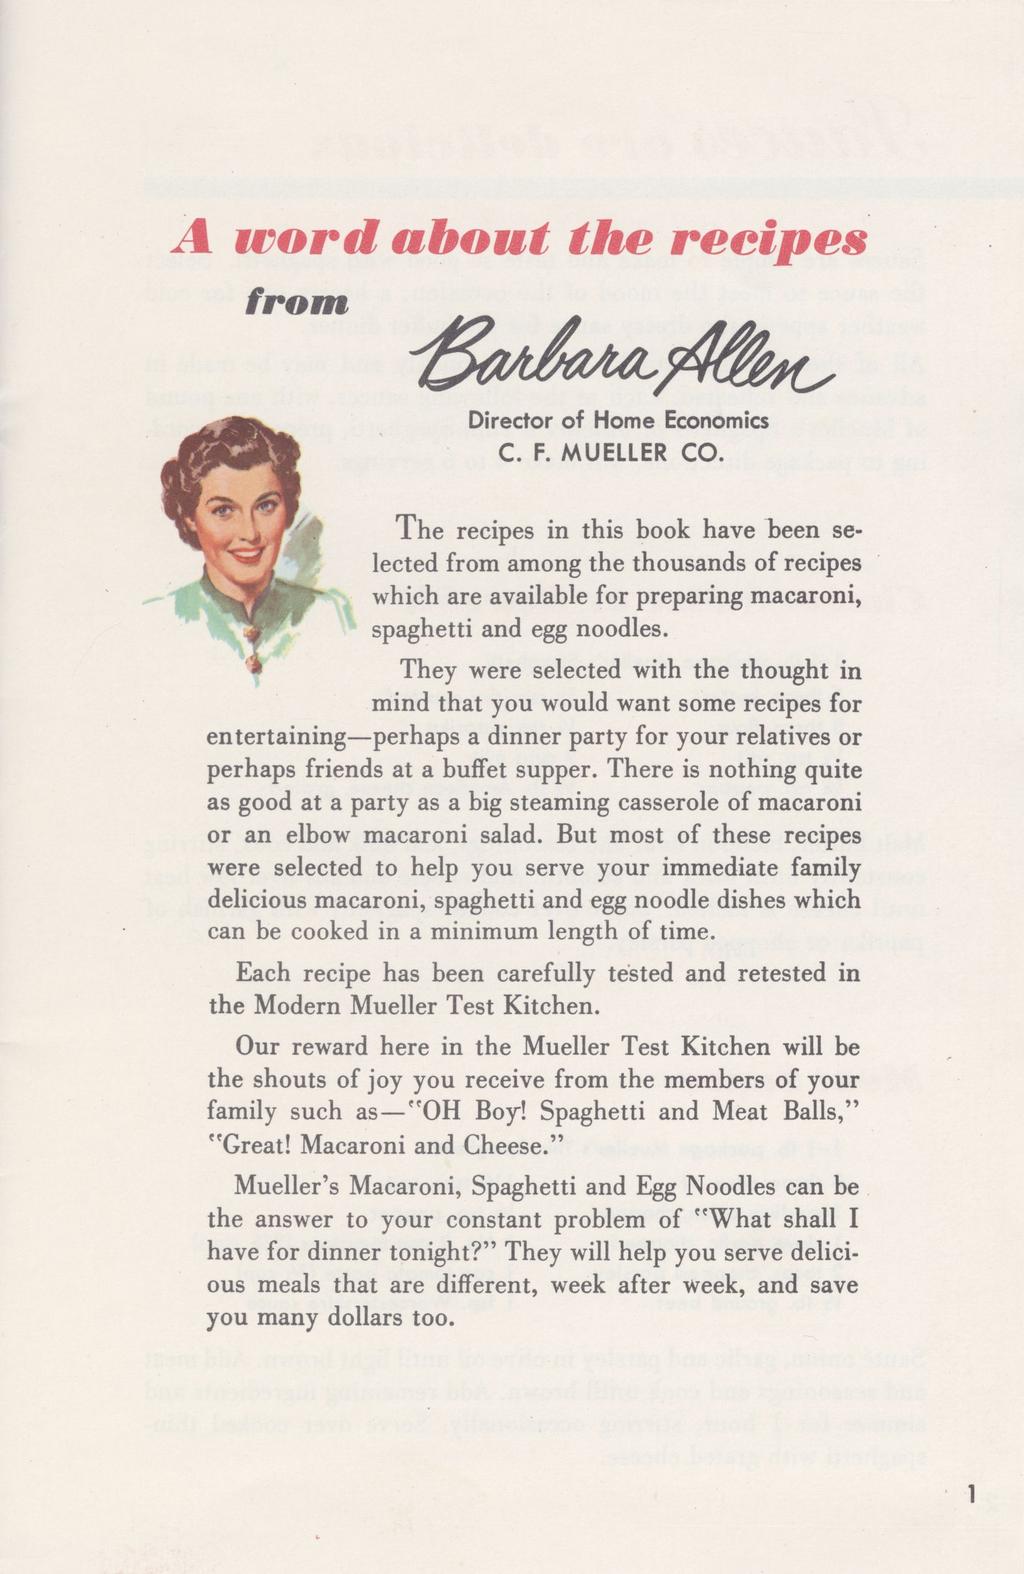 A word about the recipes from Director of Home Economics C. F. MUELLER CO.